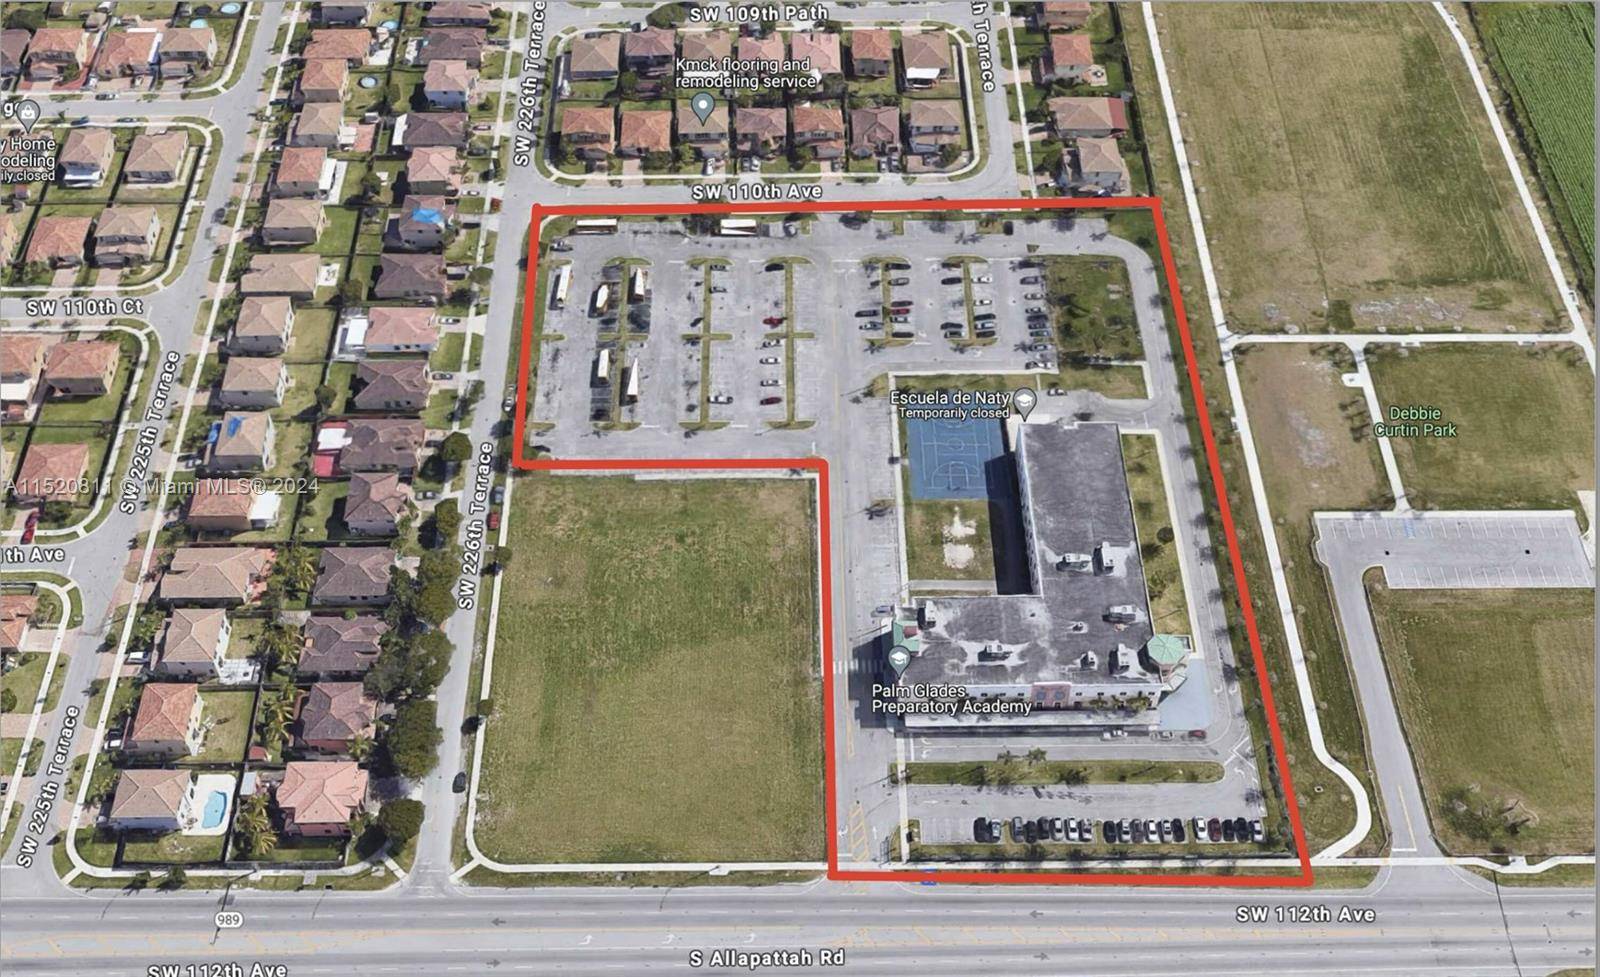 A large prime development site opportunity situated East of US 1.